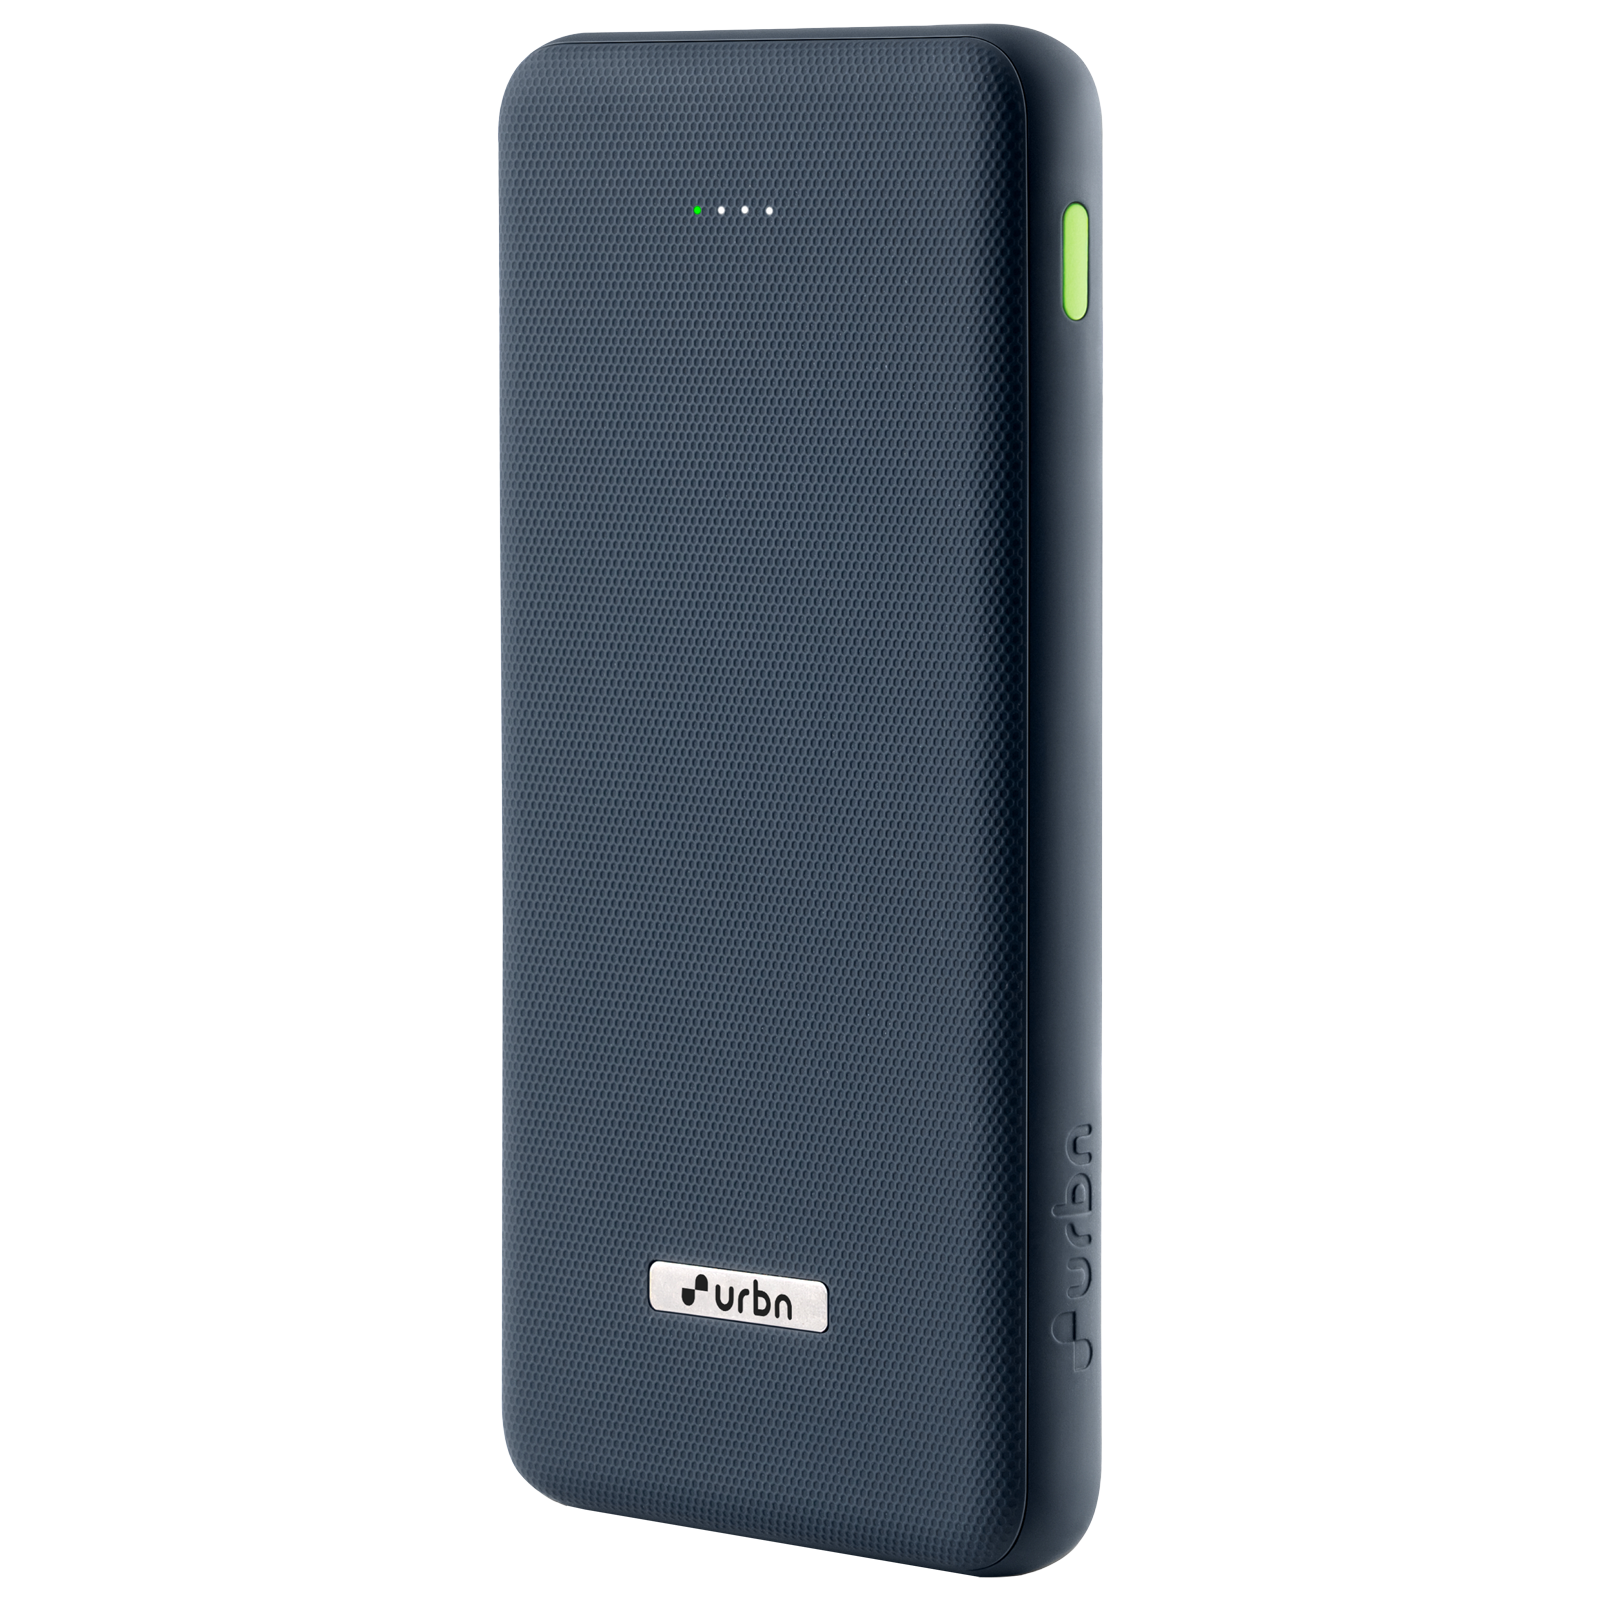 urbn UPR105 10000 mAh 22.5W Fast Charging Power Bank (1 USB Type A and 2 Type C Ports, Ultra Slim, Power Delivery Compatible, Blue)